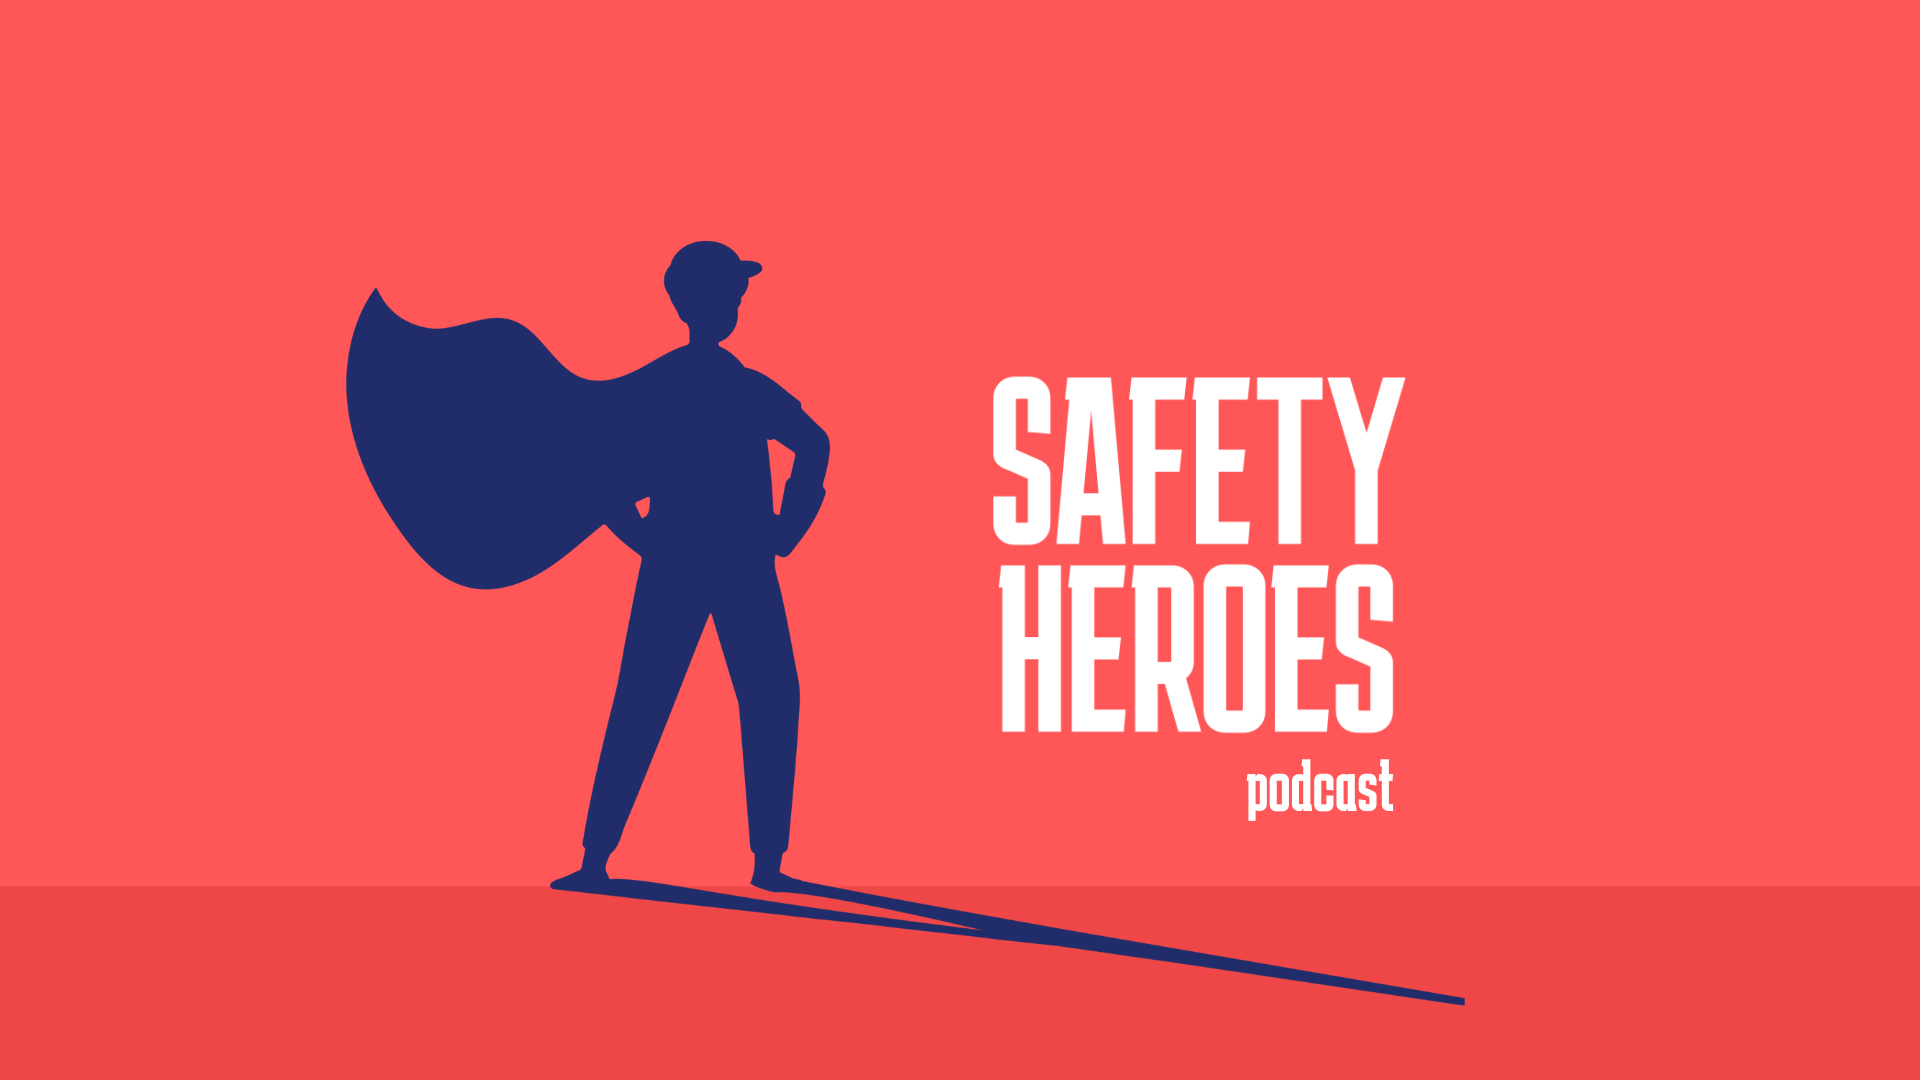 safety heroes podcast logo